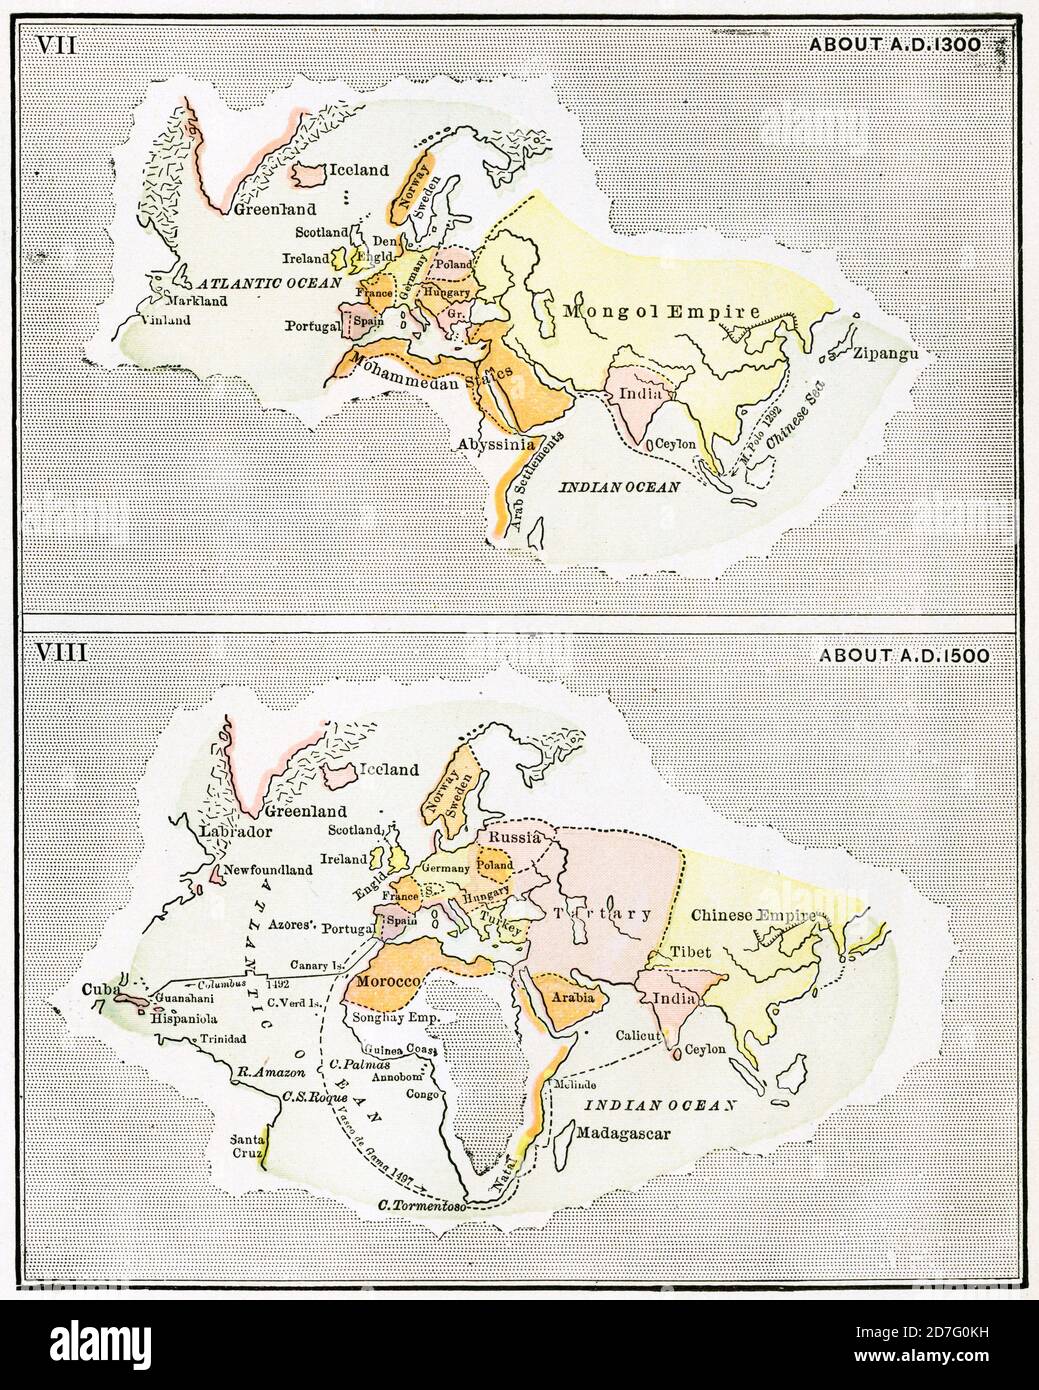 VII Map of Europe, Africa and Asia, about A.D. 1300, VIII Map of Europe, Africa and Asia, about A.D. 1350, Illustration, Ridpath's History of the World, Volume III, by John Clark Ridpath, LL. D., Merrill & Baker Publishers, New York, 1897 Stock Photo